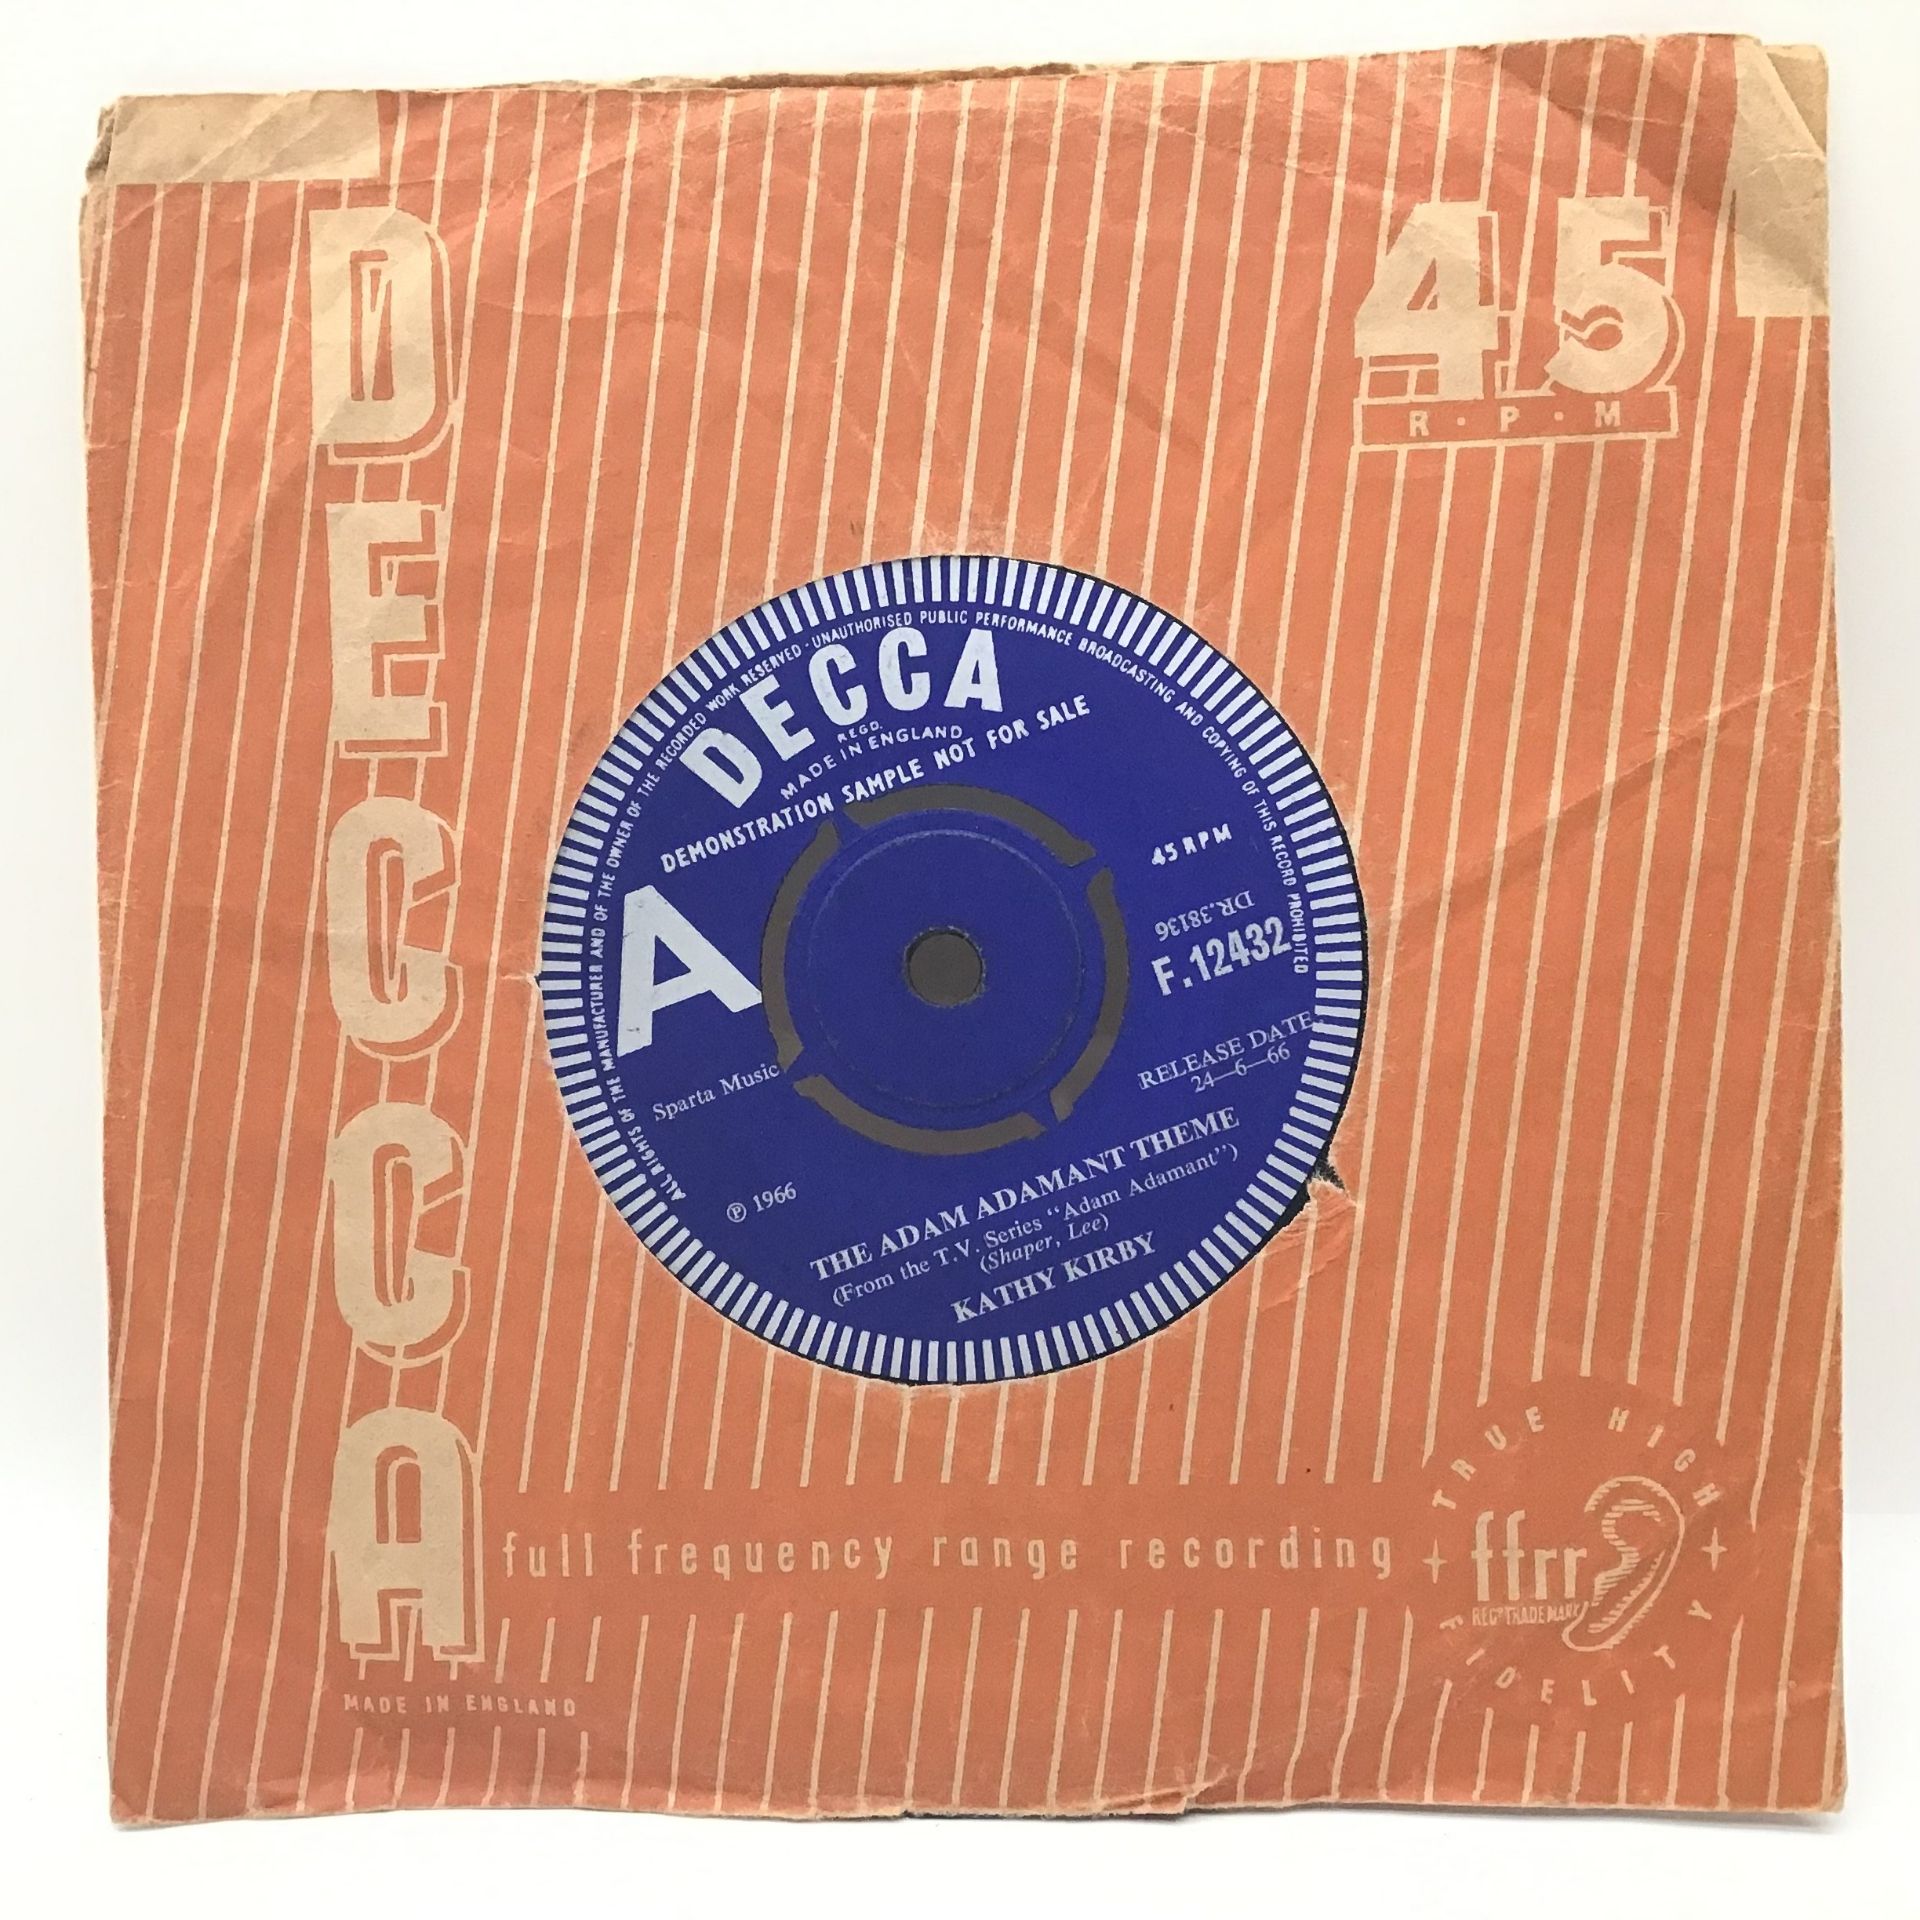 KATHY KIRBY - THE ADAM ADAMANT THEME - DEMO 45. On Decca F.12432 from 1966 and found here in VG+